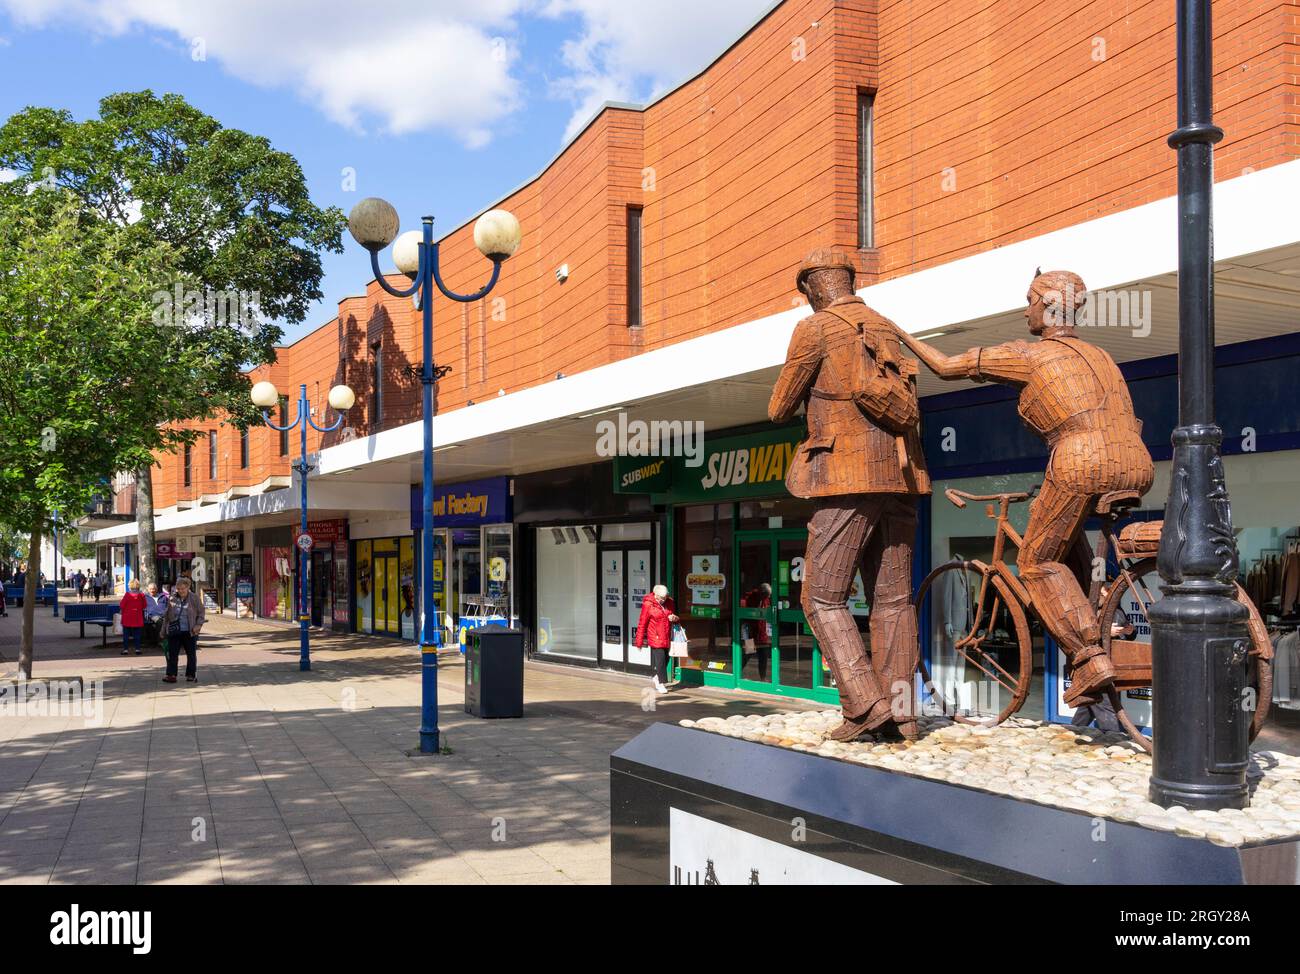 Scunthorpe Steelworkers Sculpture by artist Ray Lonsdale on Scunthorpe High street Scunthorpe North Lincolnshire England UK GB Europe Stock Photo